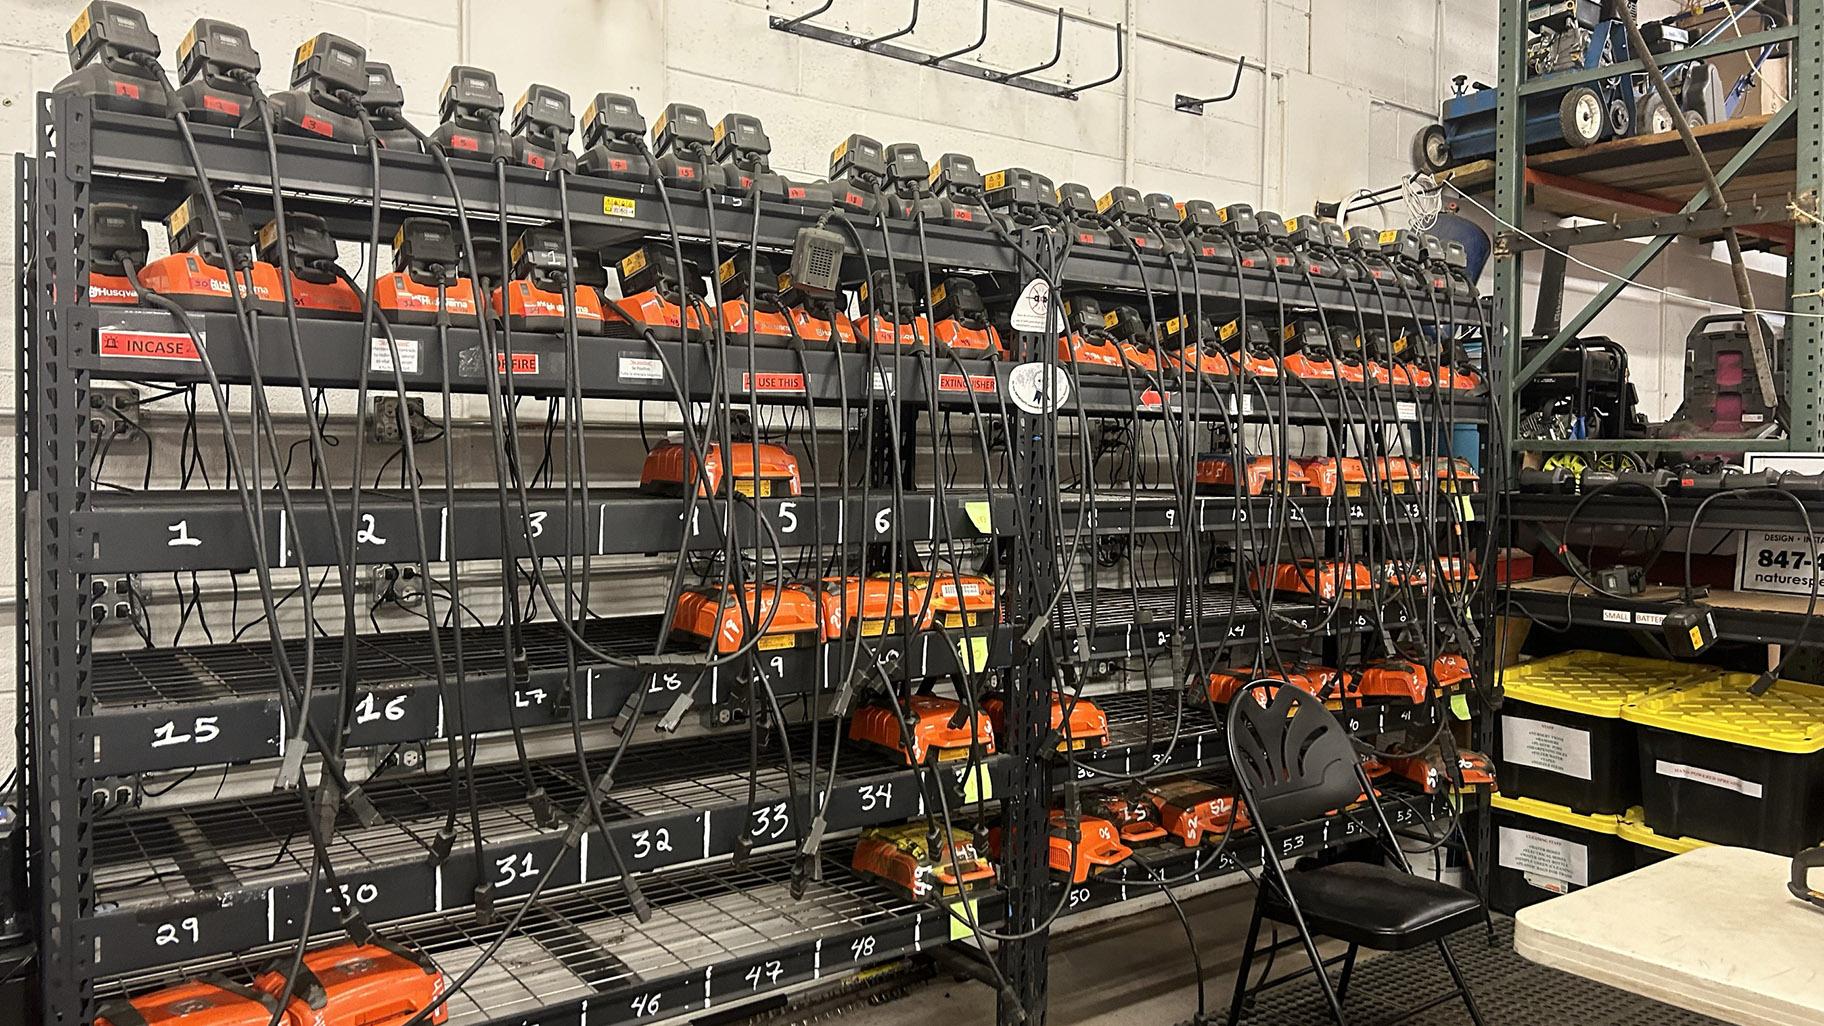 Racks of electric leaf blower chargers are pictured at Nature’s Perspective Landscaping in Evanston. (Blair Paddock / WTTW News)